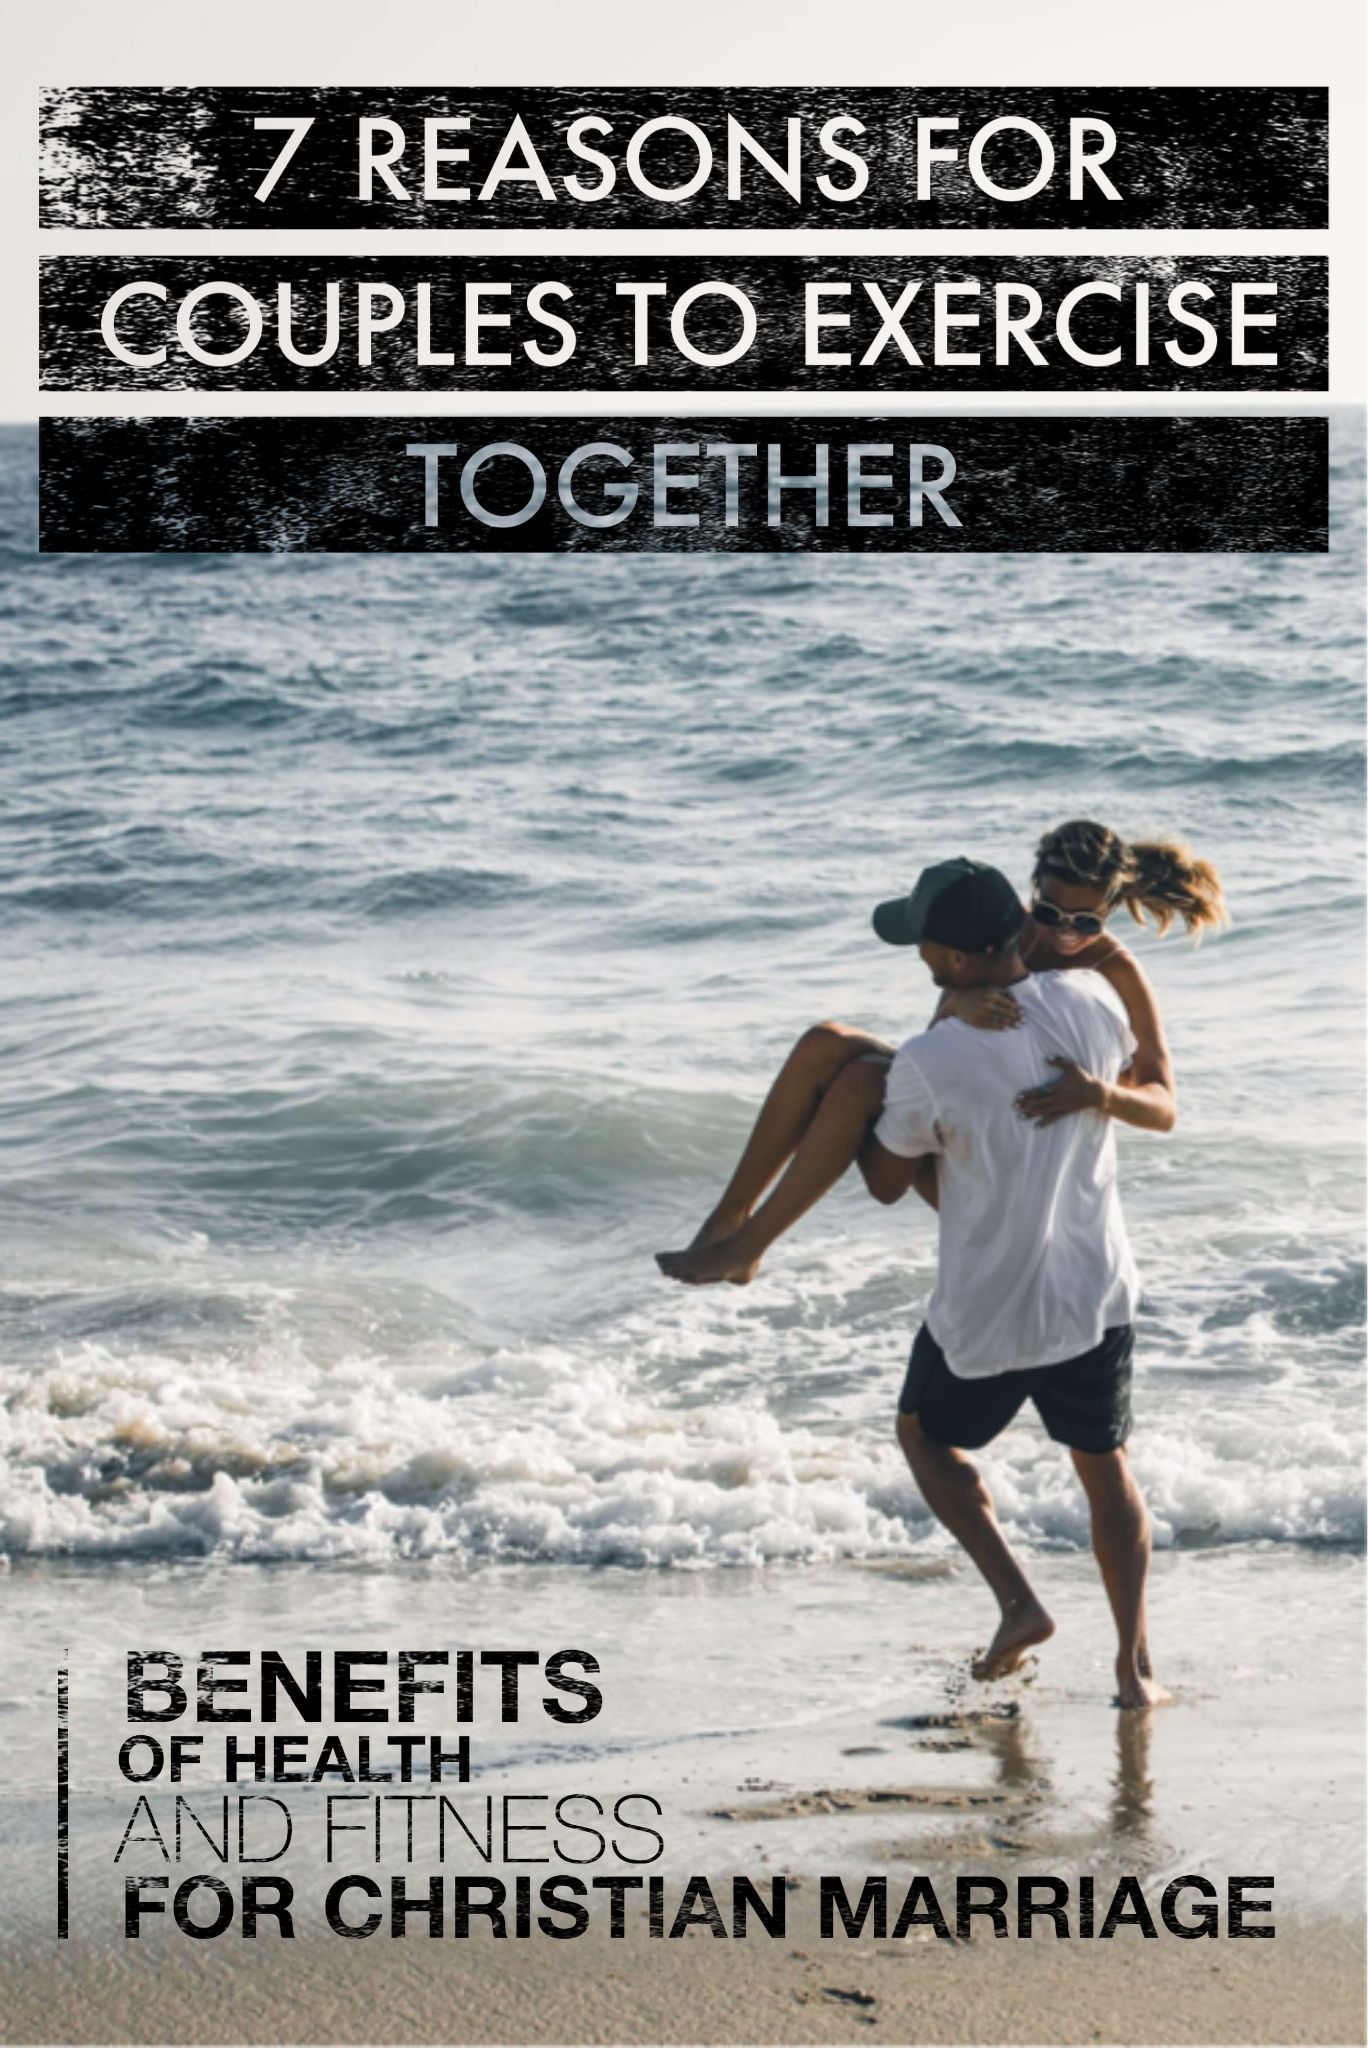 7 Reasons for Couples to Exercise Together -   12 fitness Couples benefits of ideas